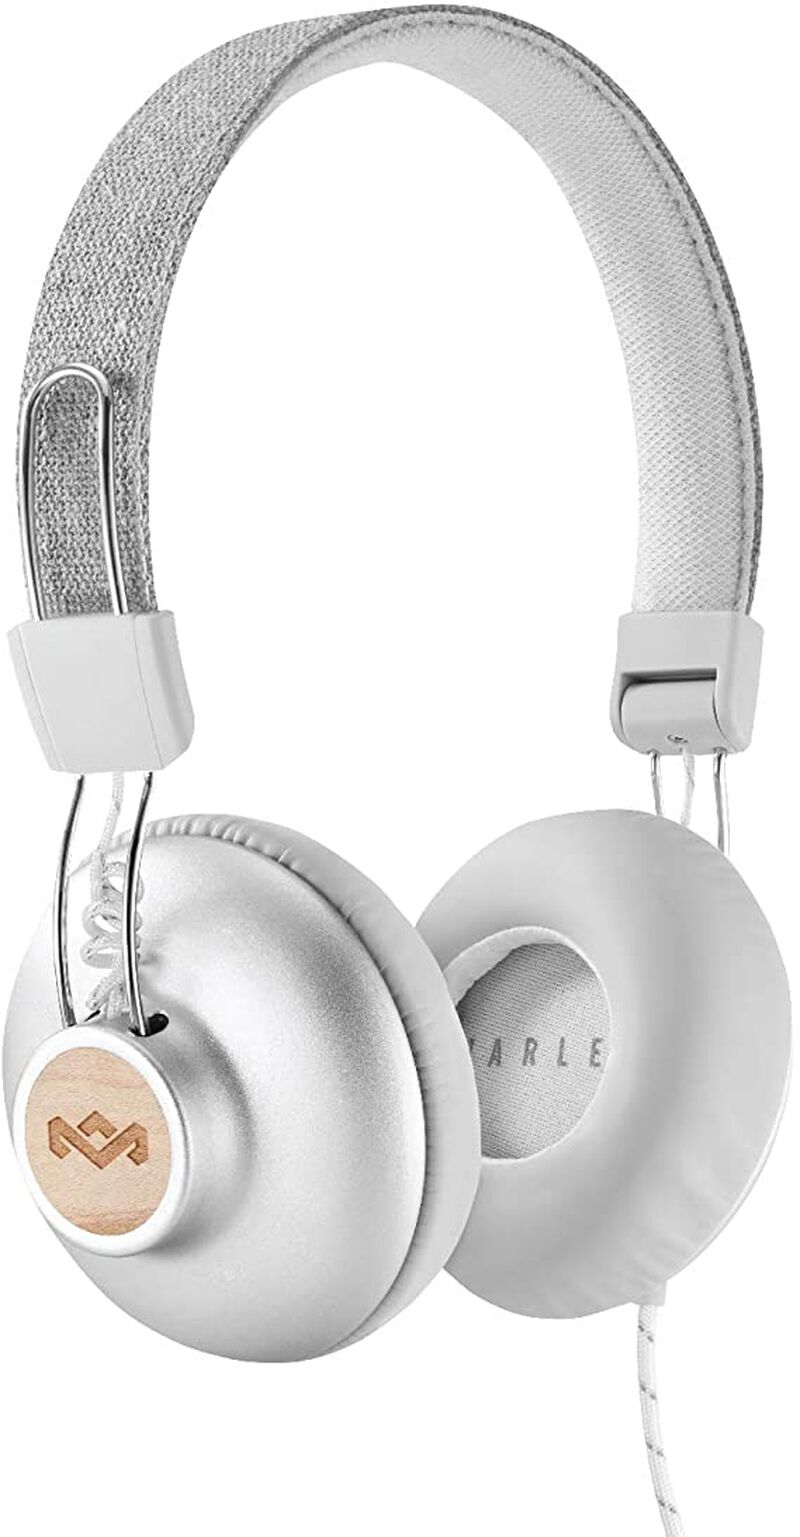 Positive Vibration 2 Headphone image number null